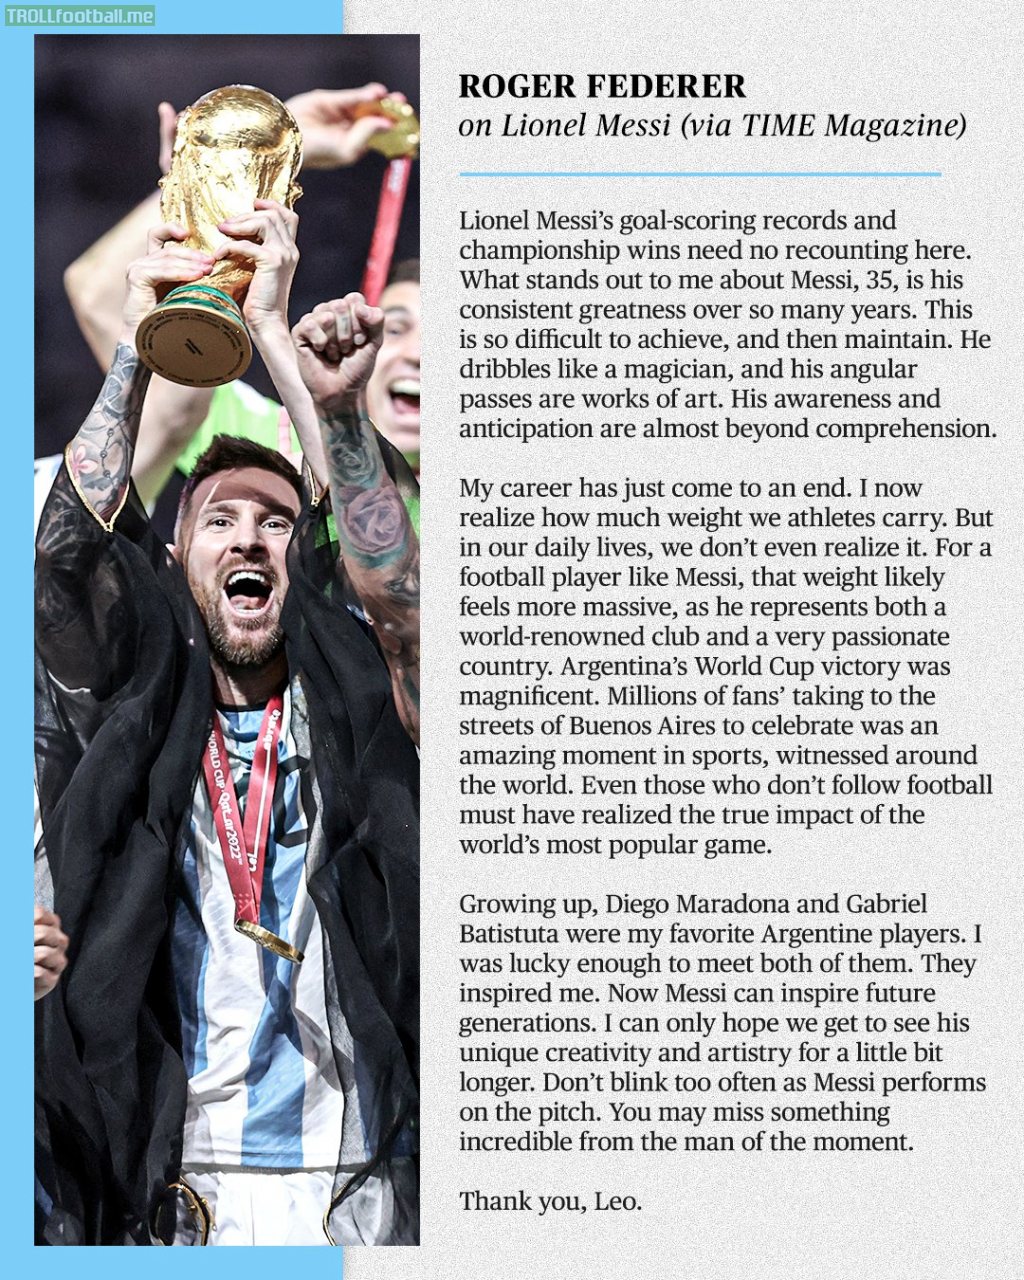 Lionel Messi was named to TIME's Magazine 100 Most Influential People of 2023 and it was accompanied by this tribute from Roger Federer.